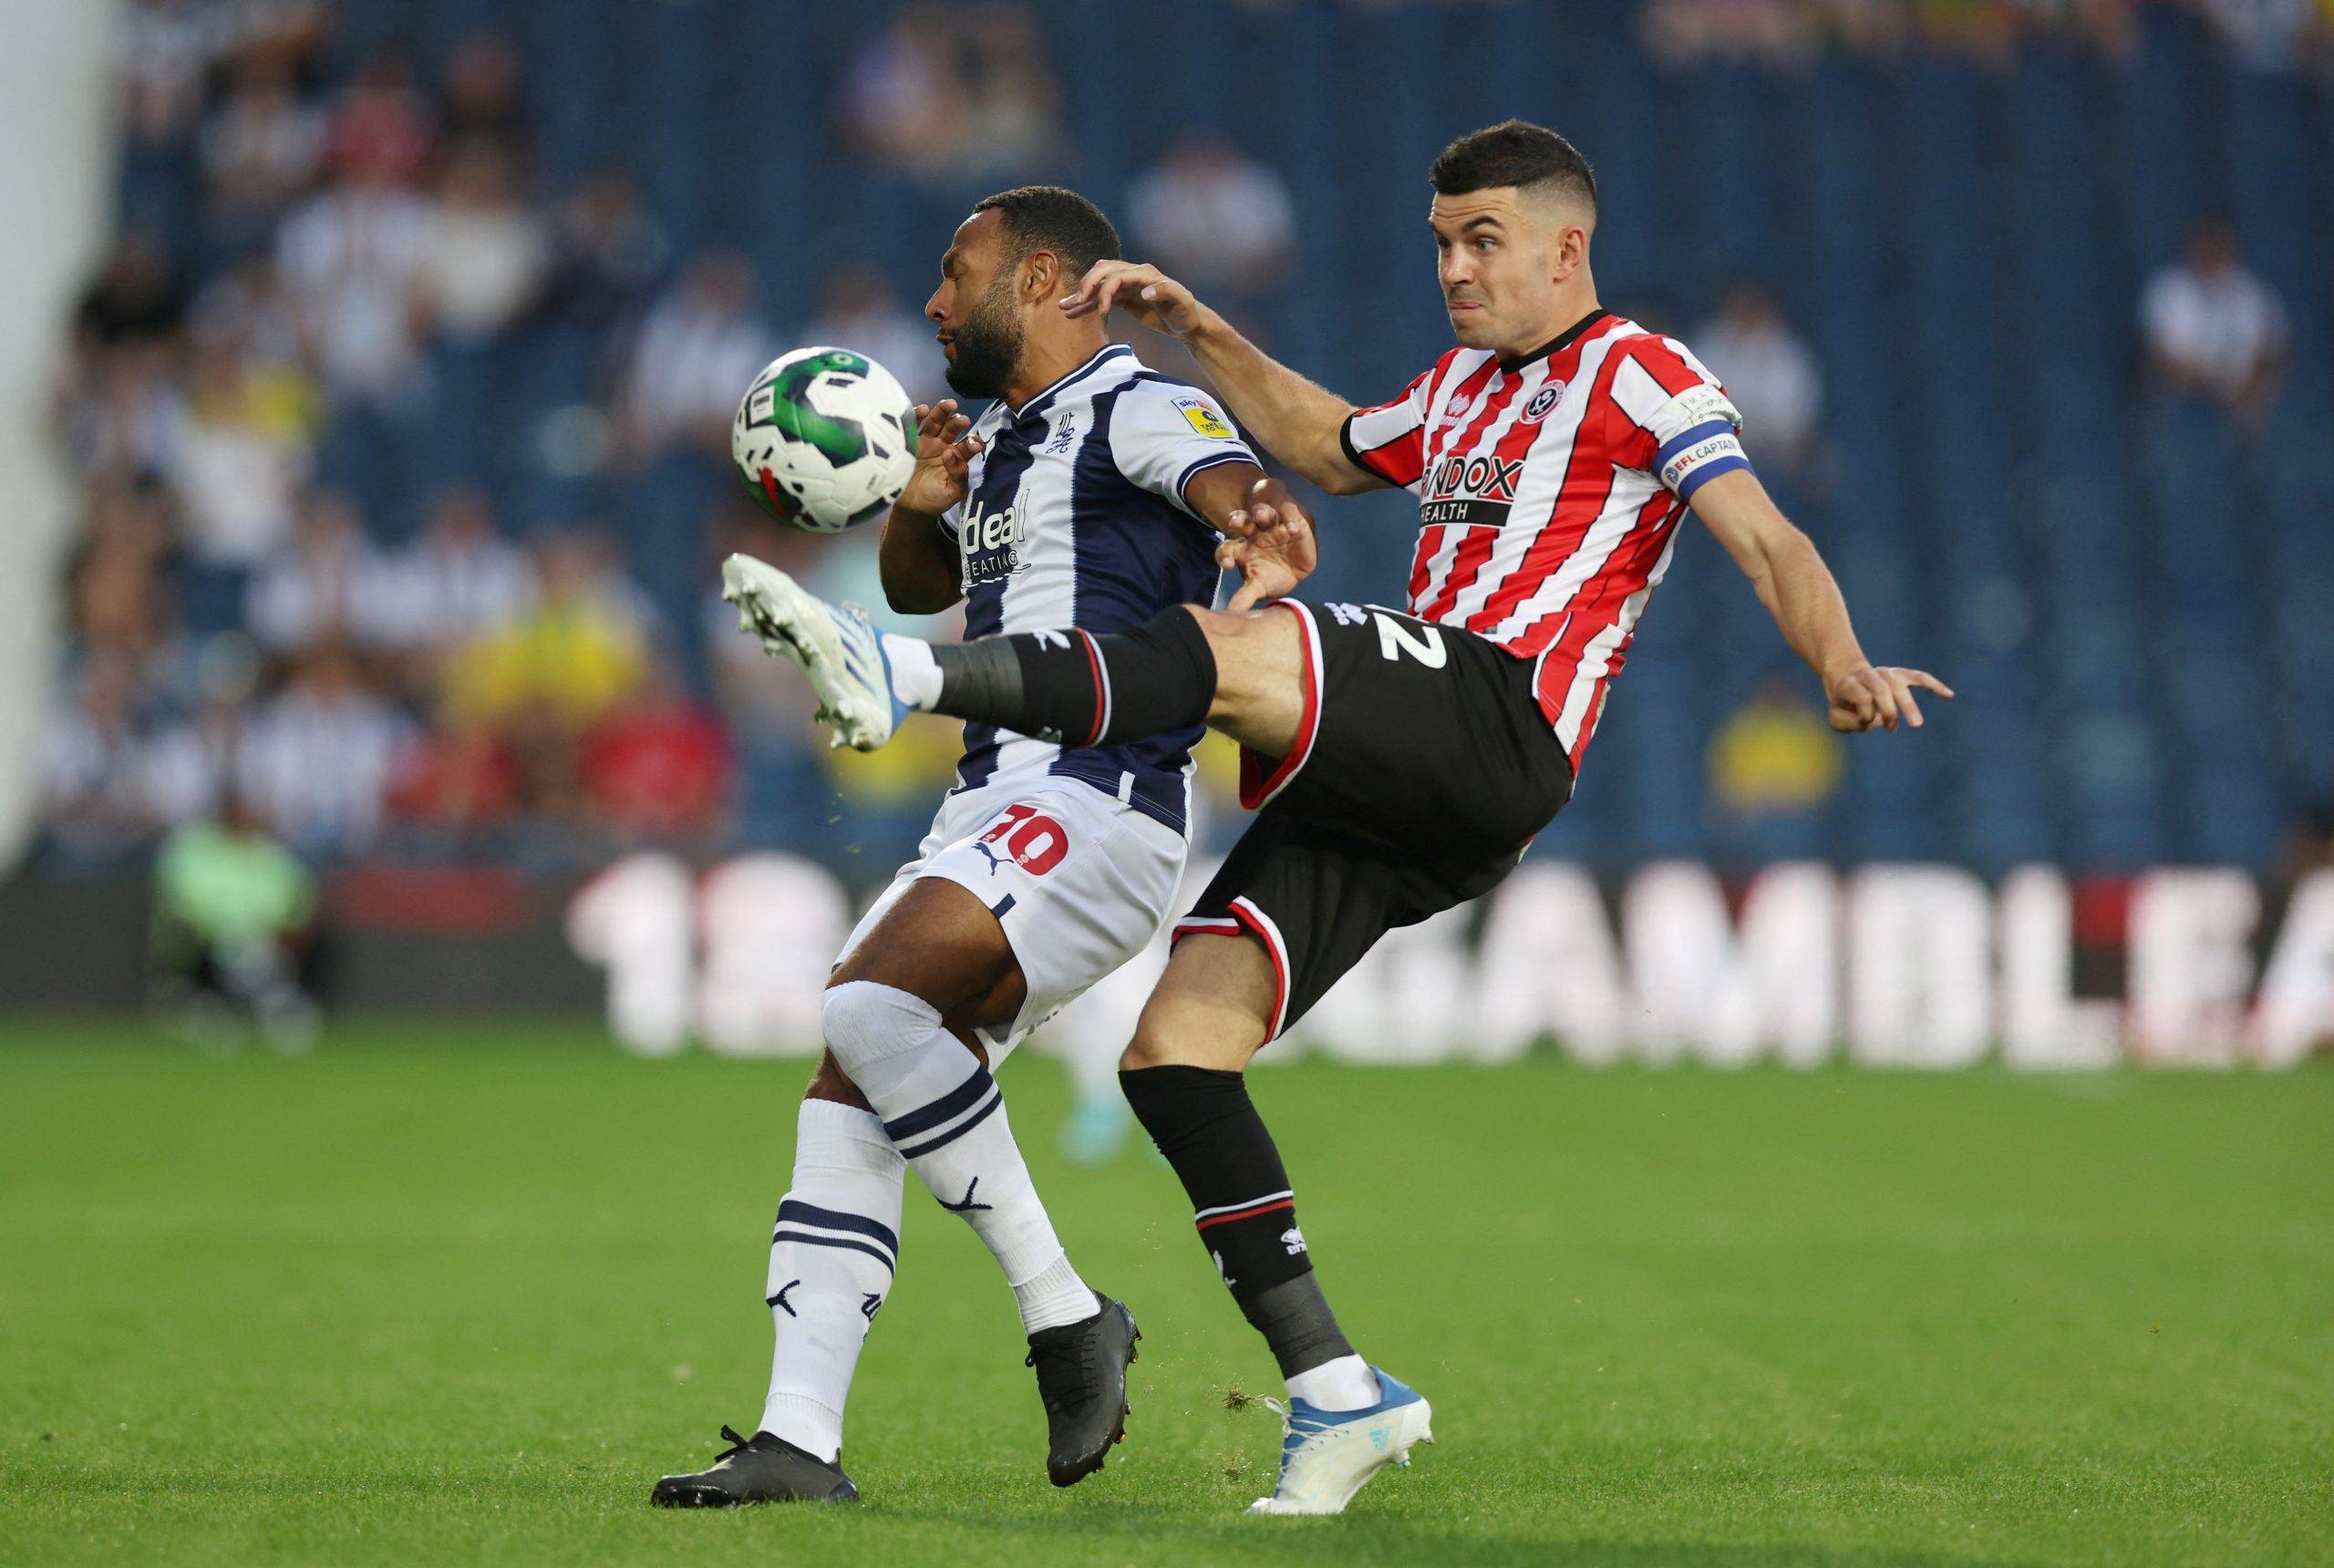 West Brom: Matt Phillips out injured for six weeks - Championship News